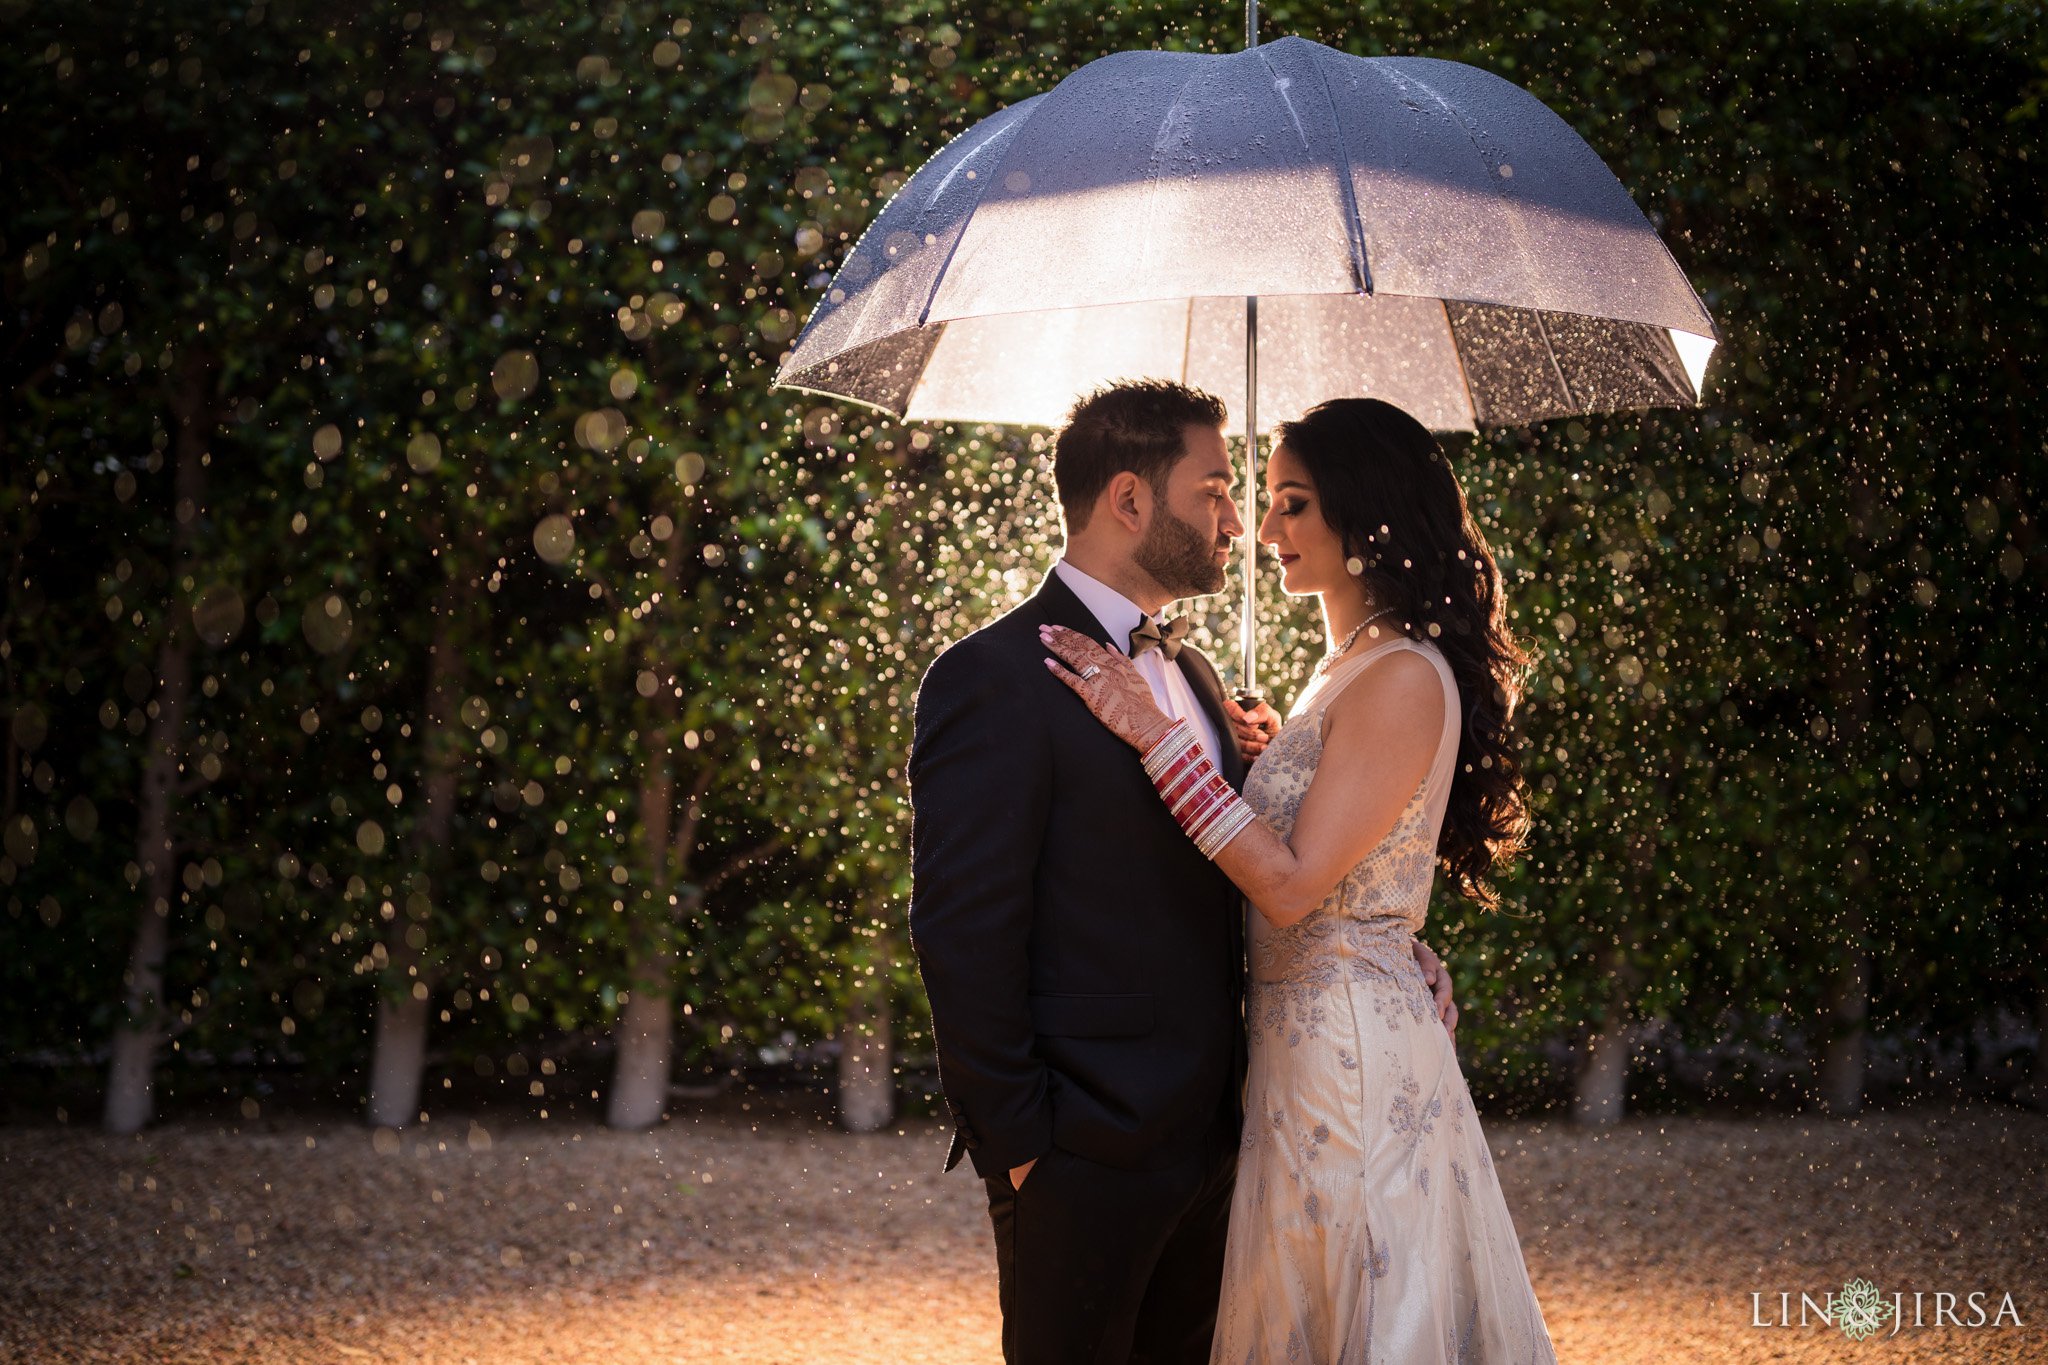 How To Prepare For Rain At Beach Wedding- Complete Guide